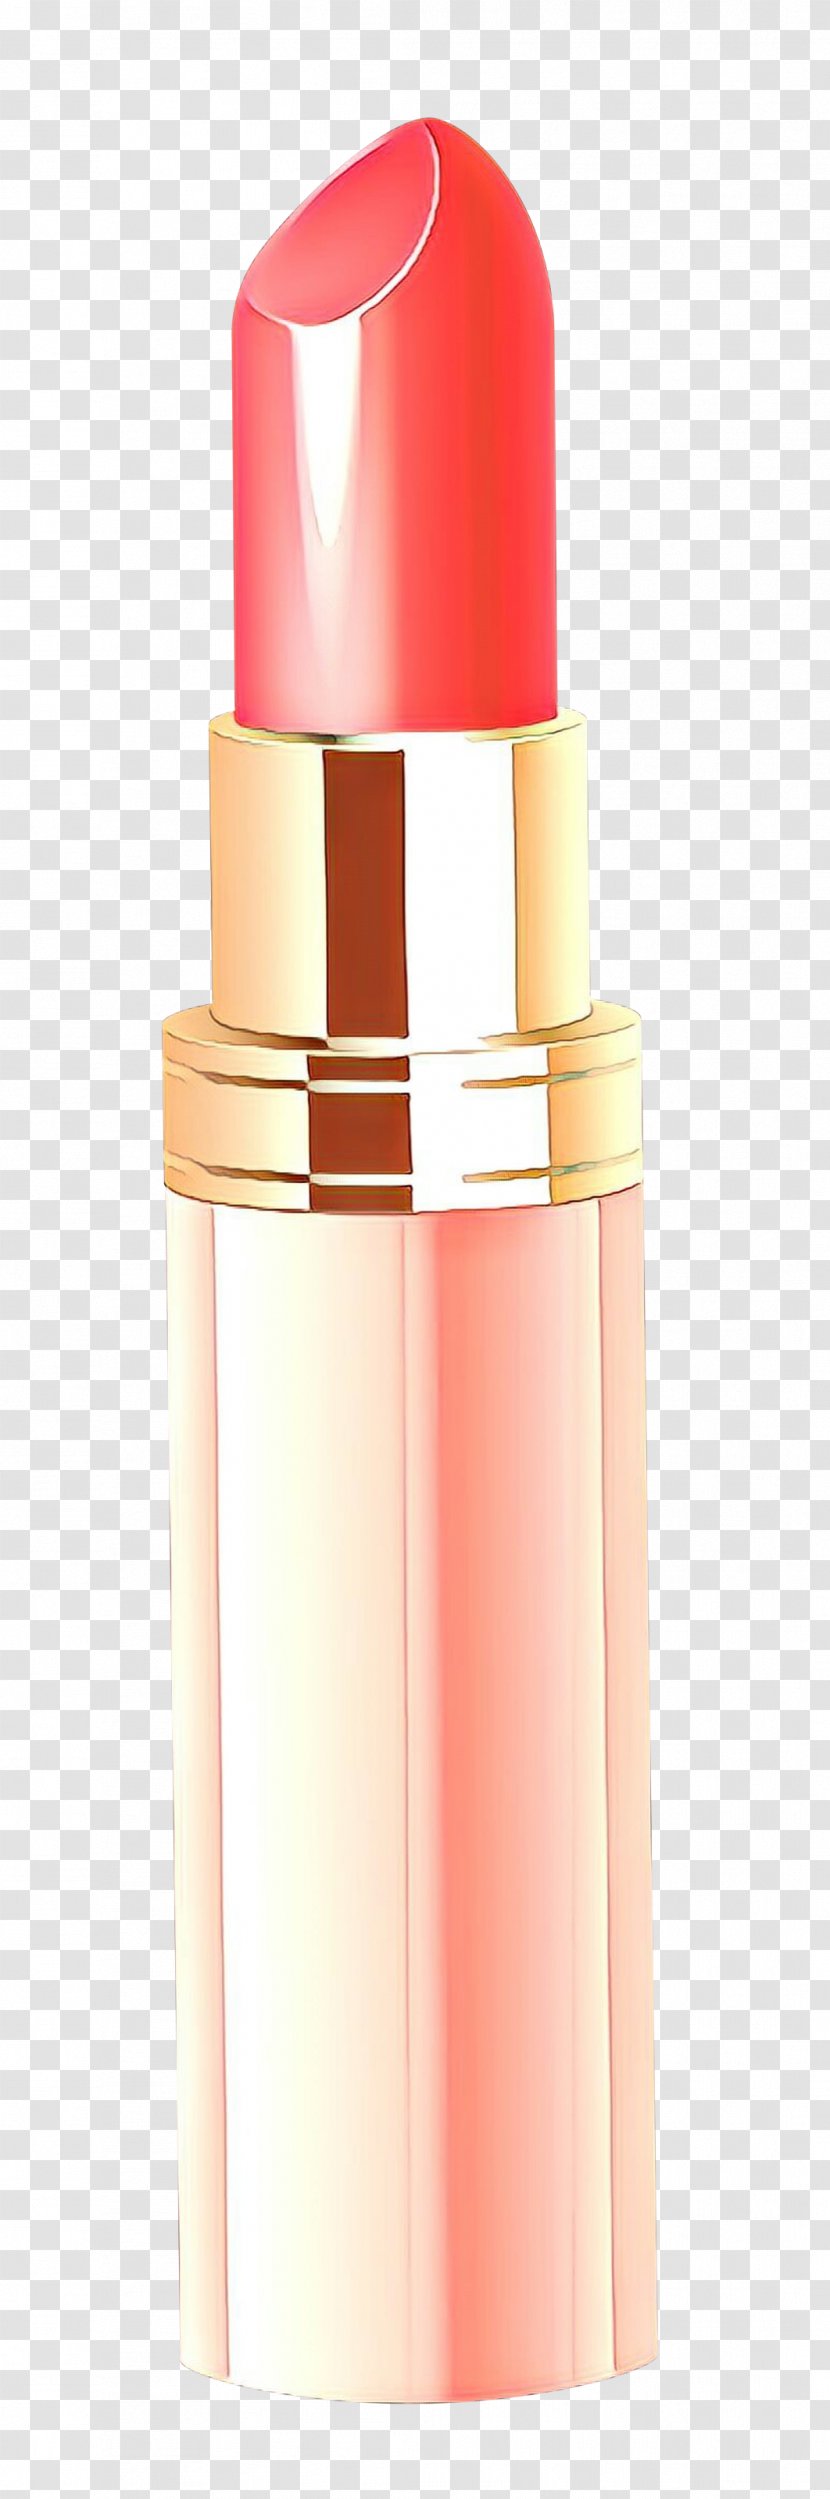 Pink Cosmetics Lip Care Beauty Lipstick - Gloss - Beige Material Property Transparent PNG